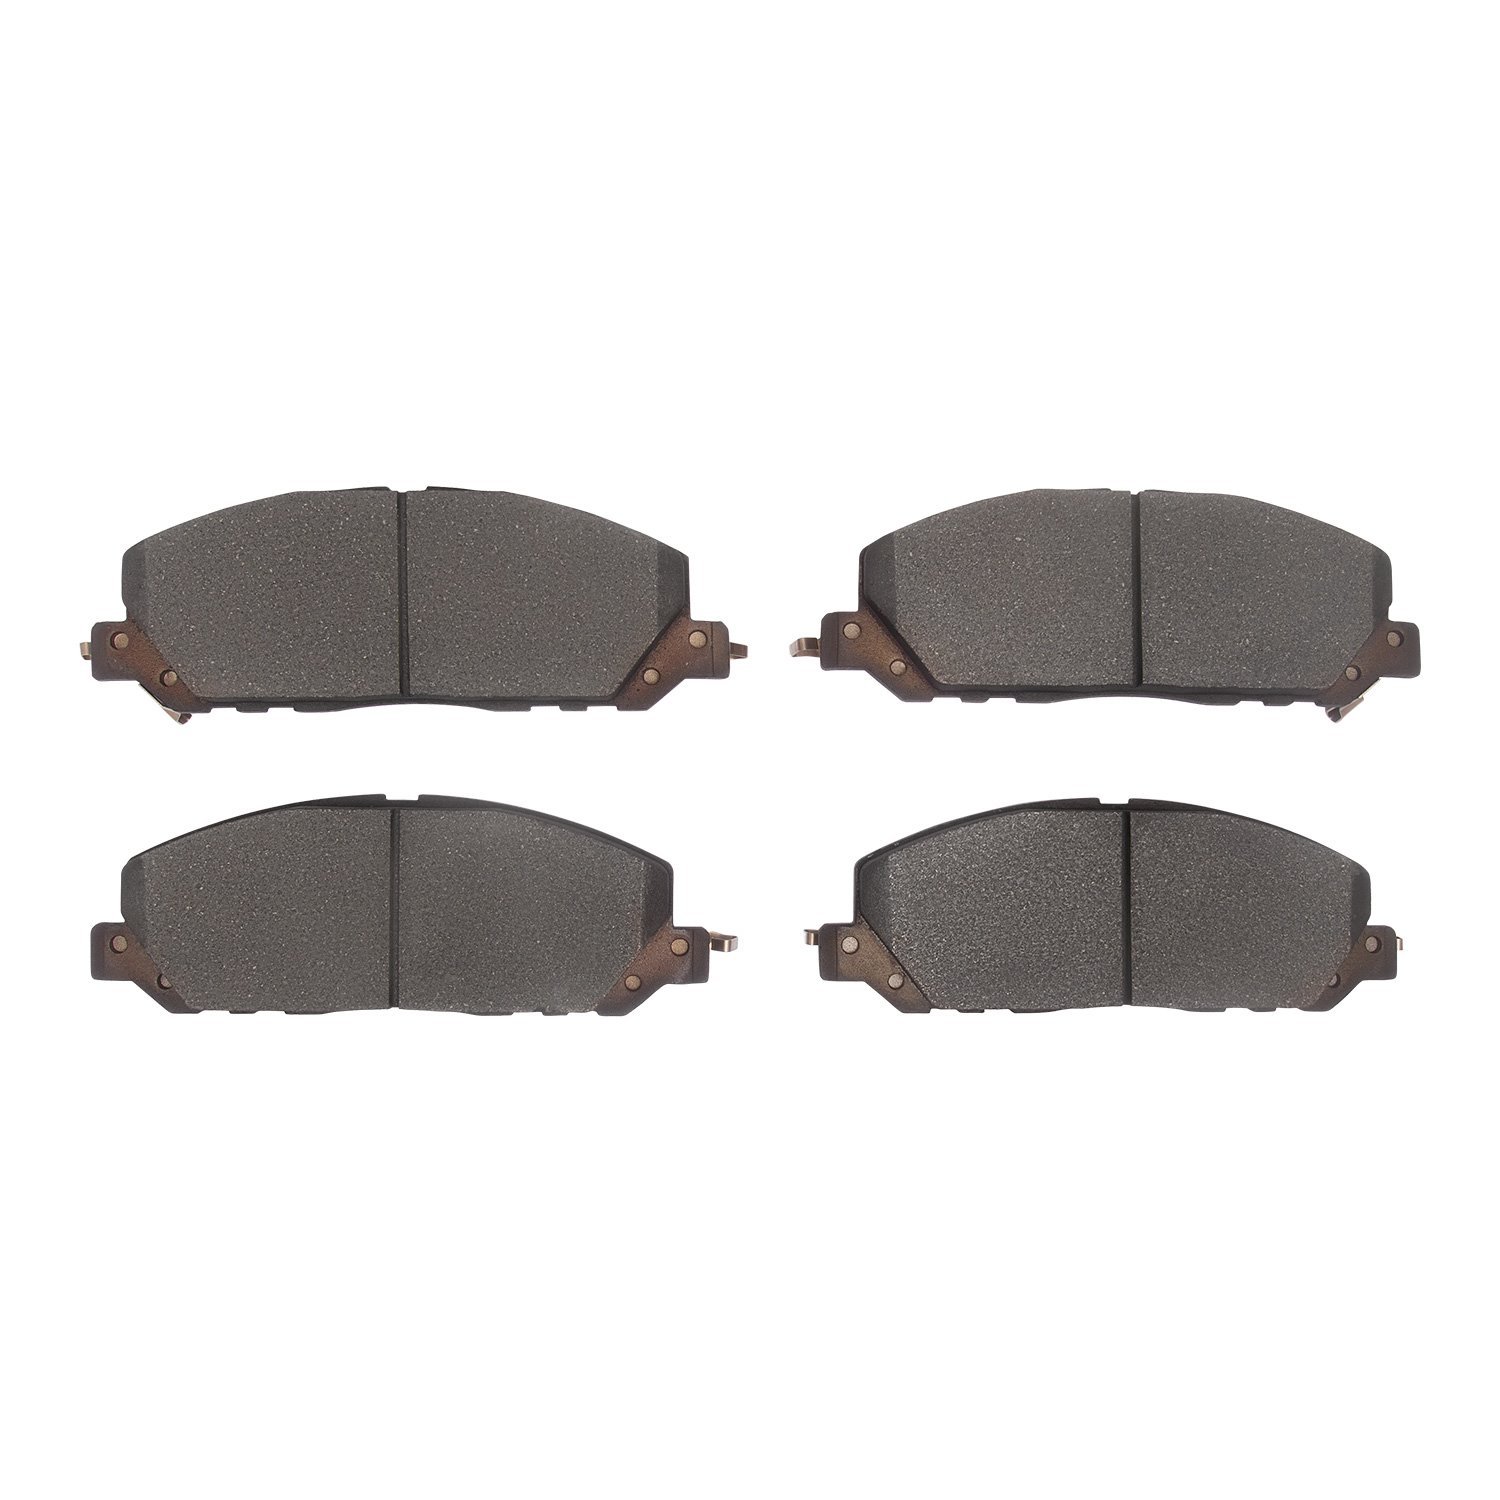 Super-Duty Brake Pads, Fits Select Ford/Lincoln/Mercury/Mazda, Position: Front